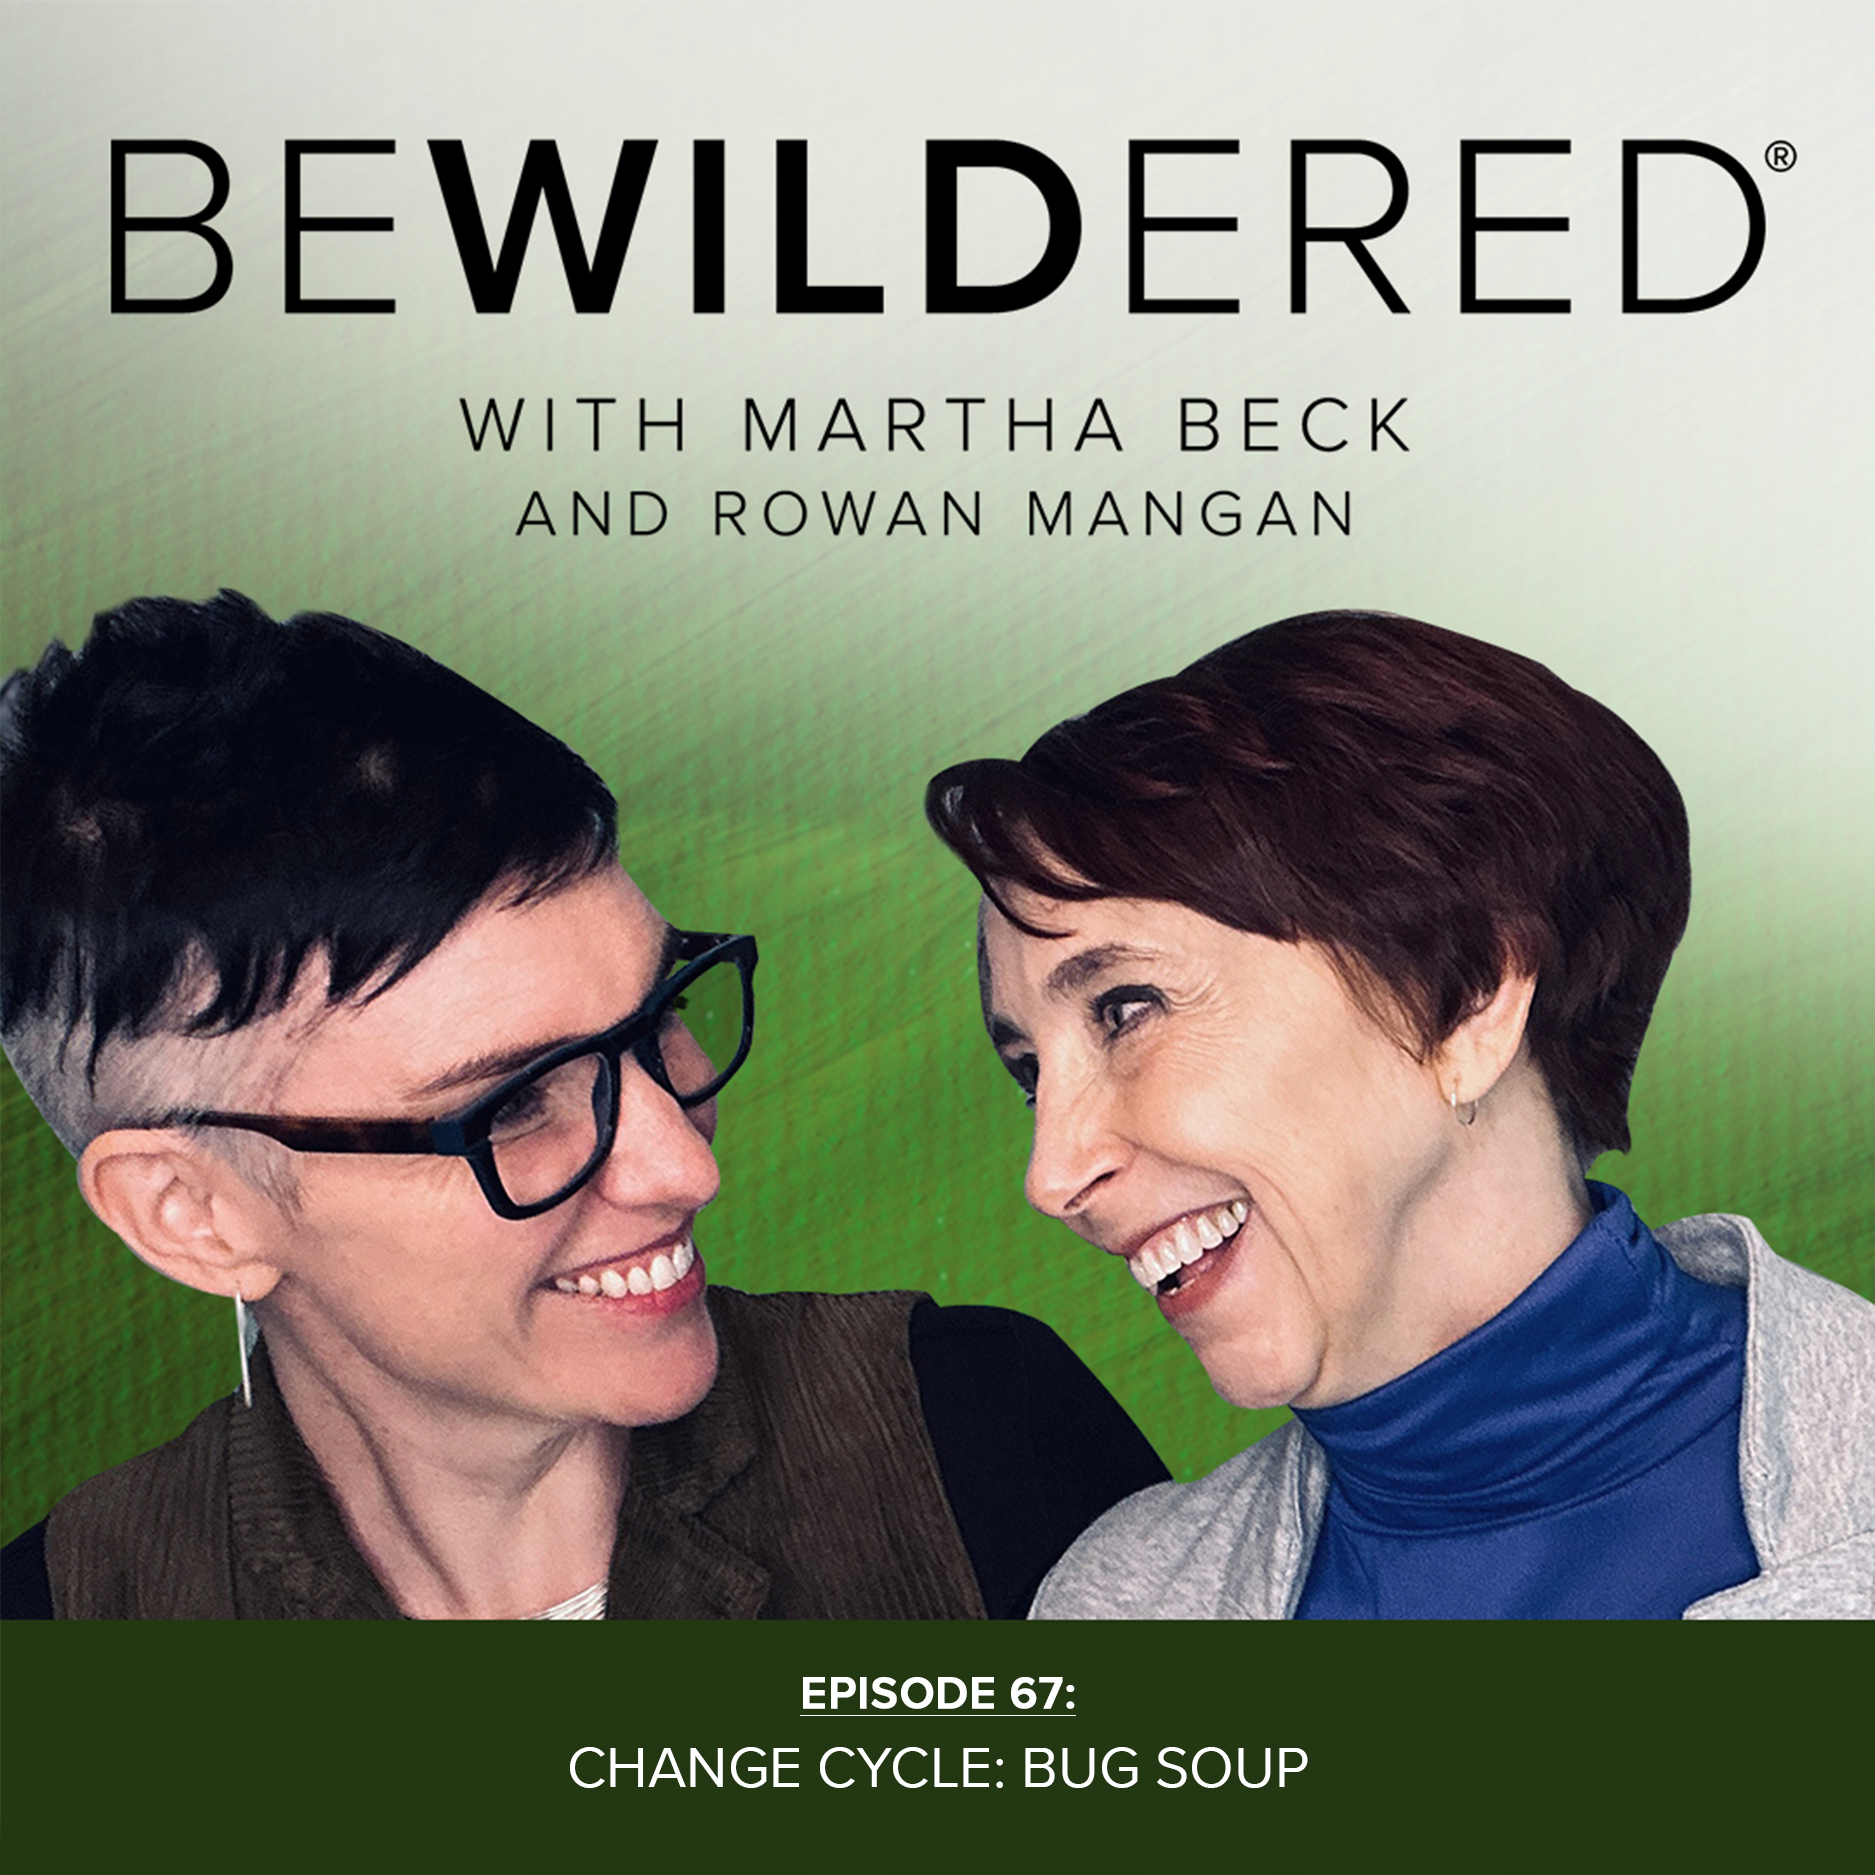 Image for Episode #67 Change Cycle: Bug Soup for the Bewildered Podcast with Martha Beck and Rowan Mangan